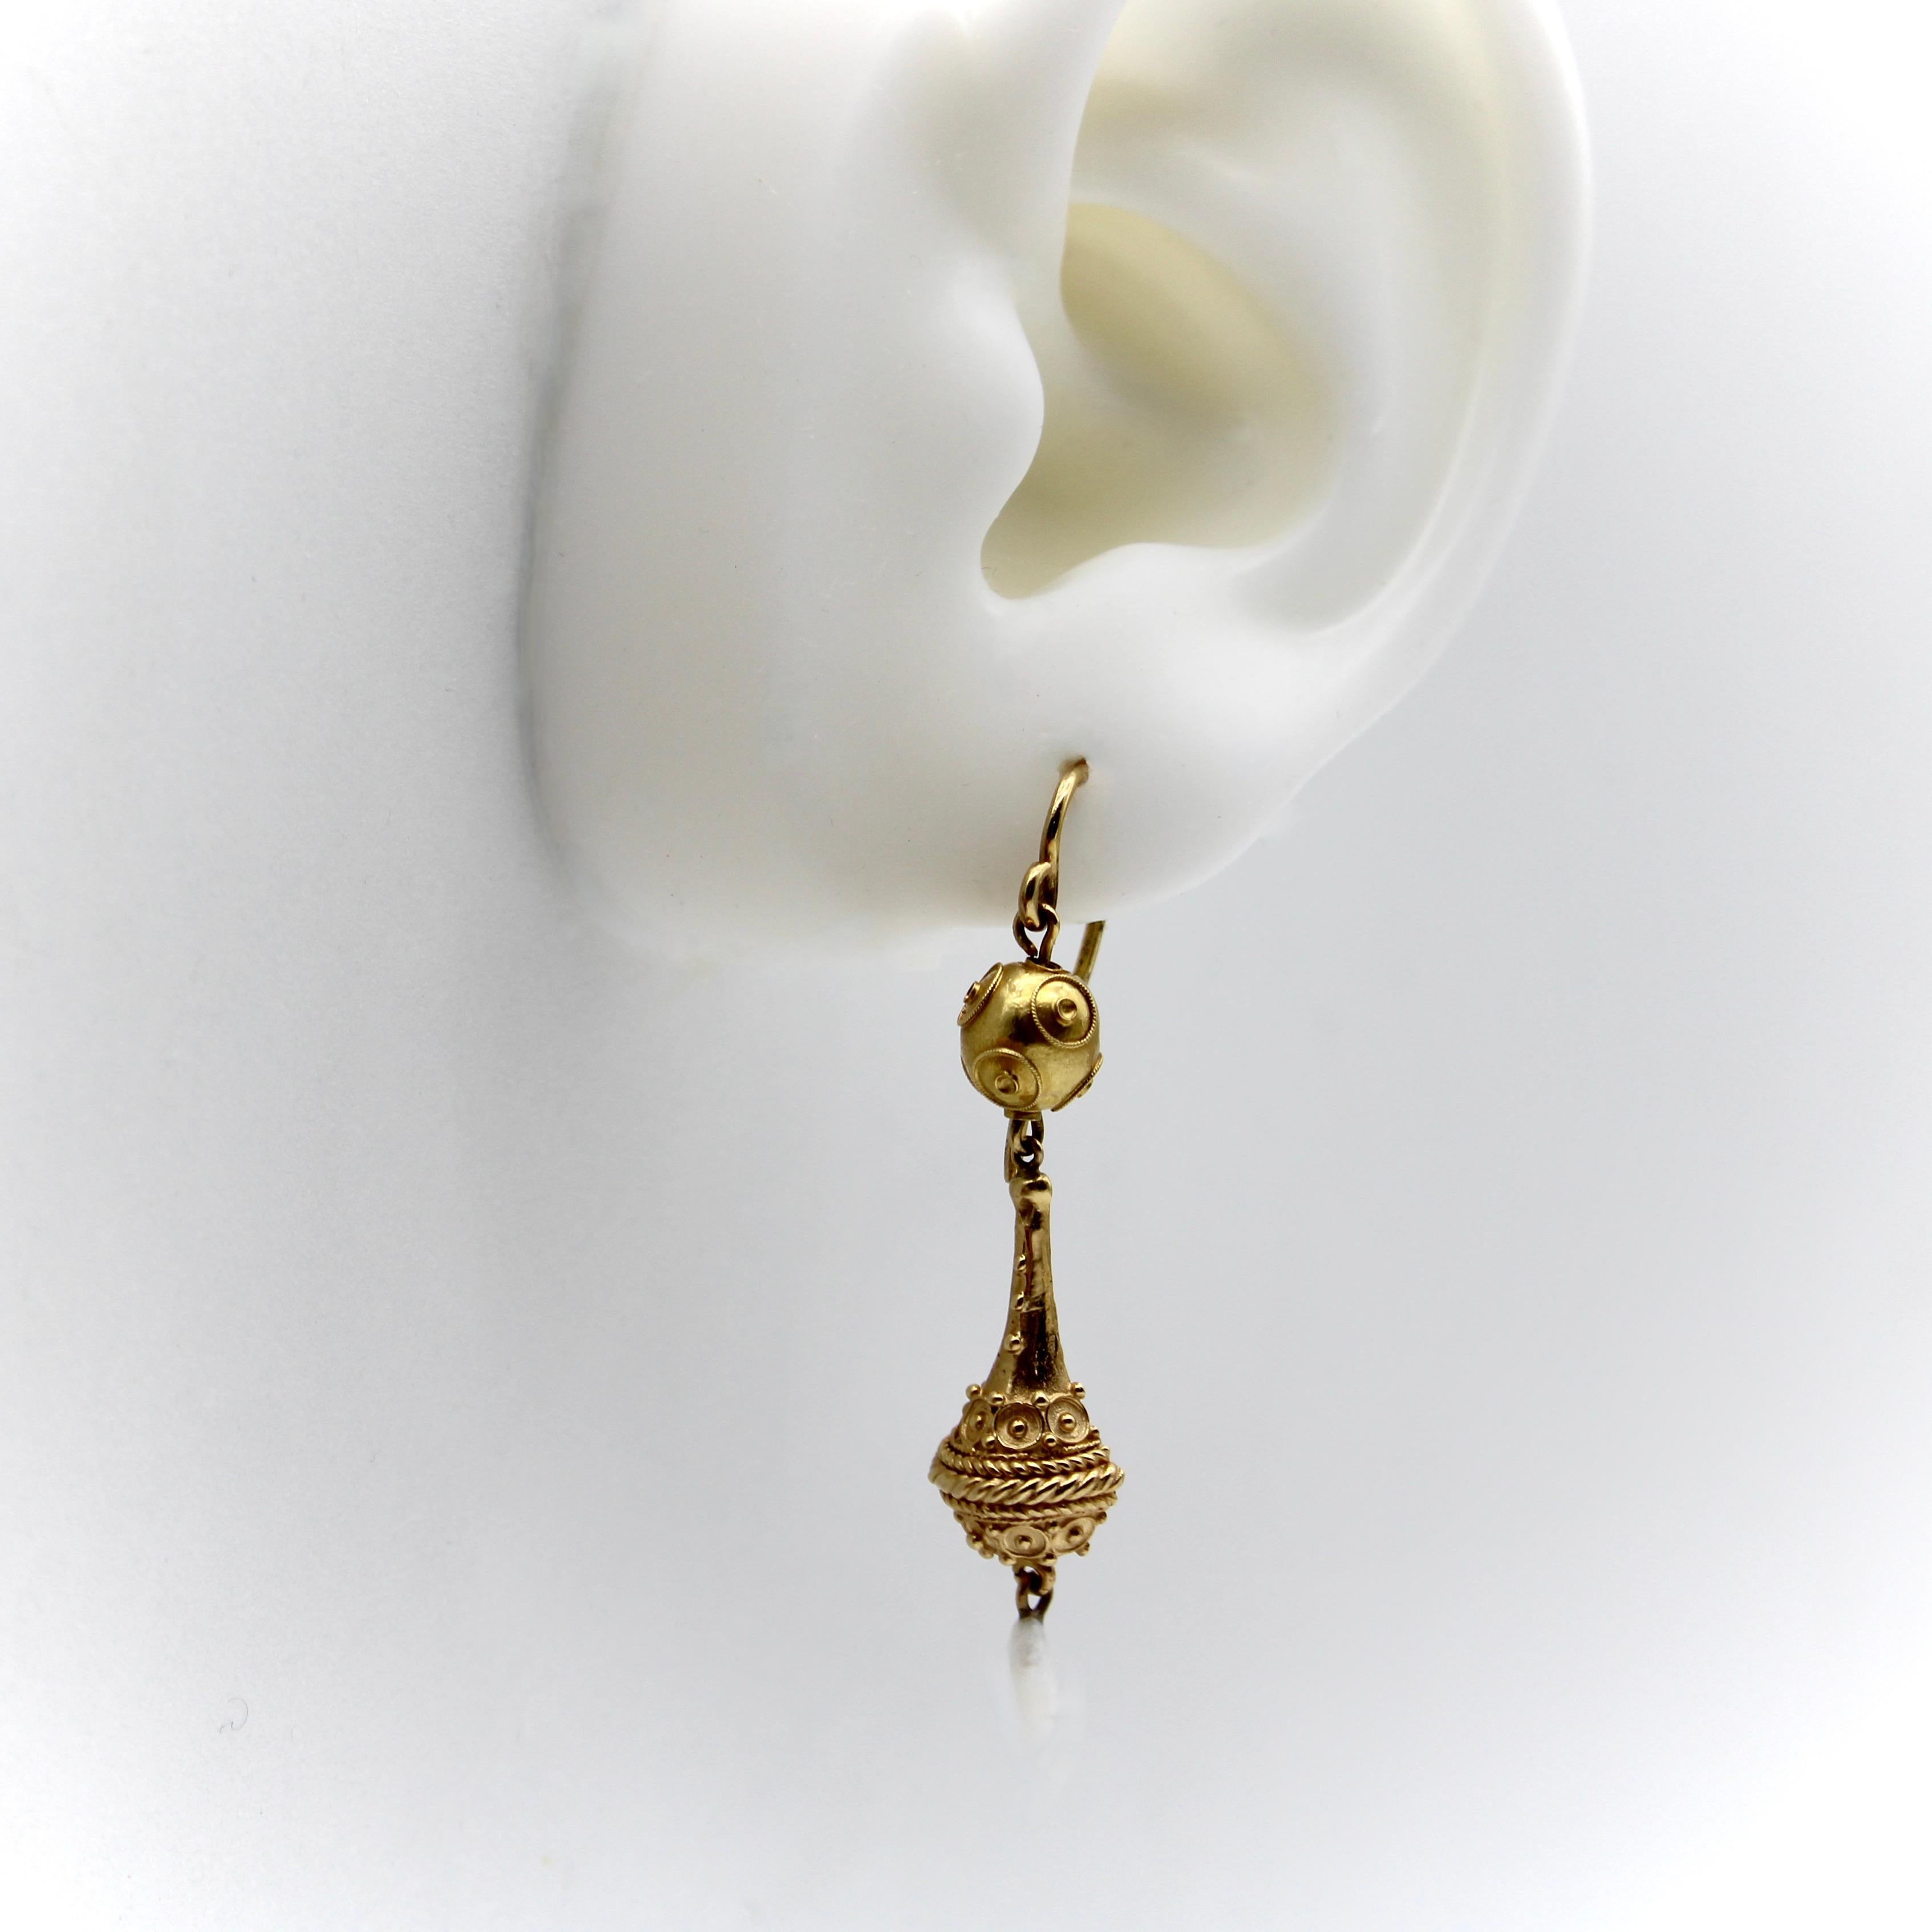 This is a stunning pair of 14k Etruscan Revival drop earrings featuring intricate gold detailing and a delicate Mississippi river pearl dangling element. The shape of the earrings resembles an elongated urn hanging from an Etruscan Revival ball.